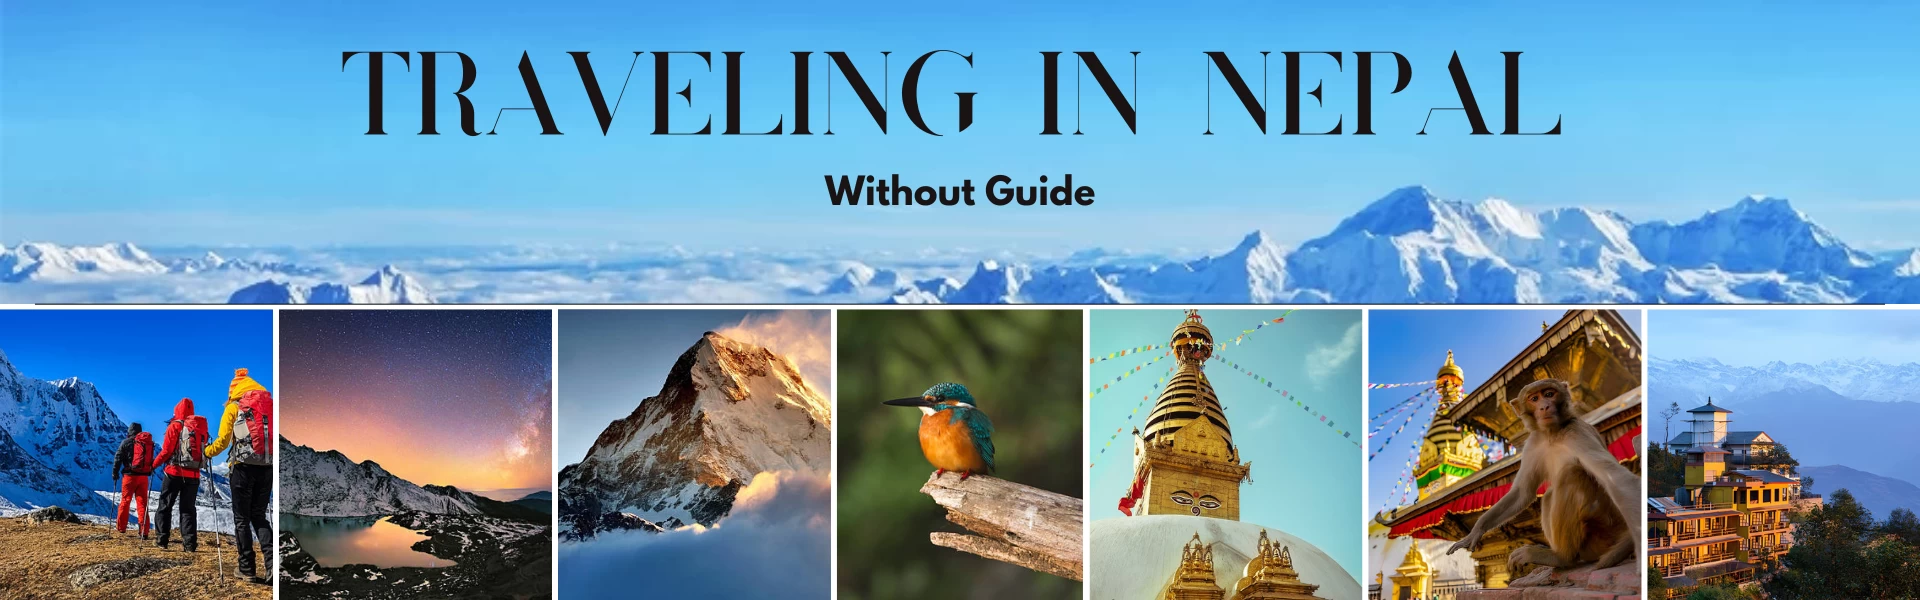 you-don't-need-a-guide-while-traveling-in-nepal